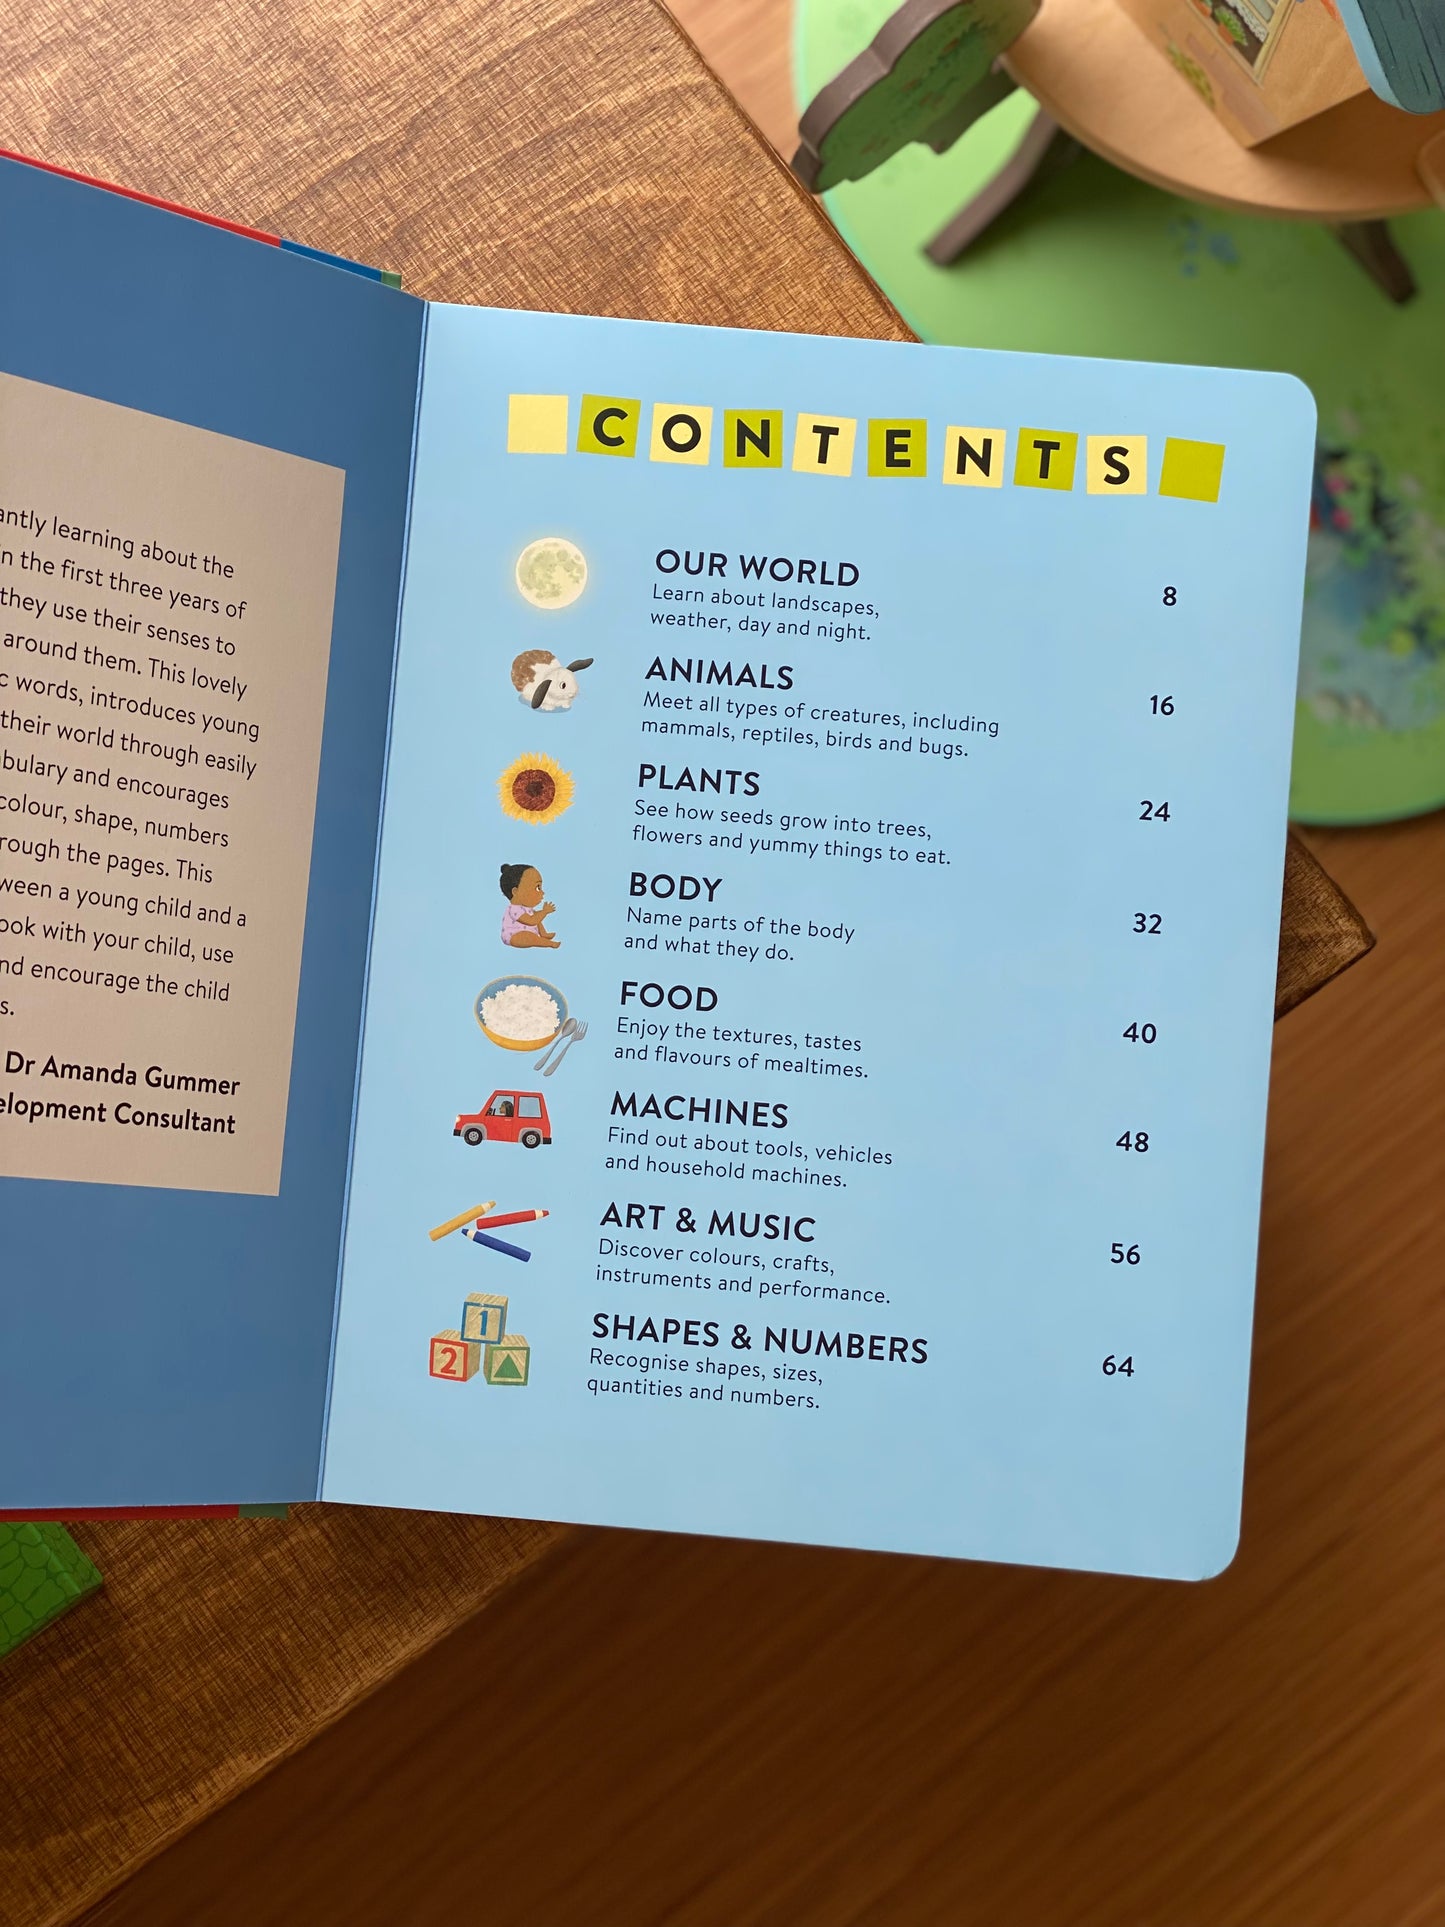 Britannica's Baby Encyclopedia: For curious kids aged 0 to 3 [Book]